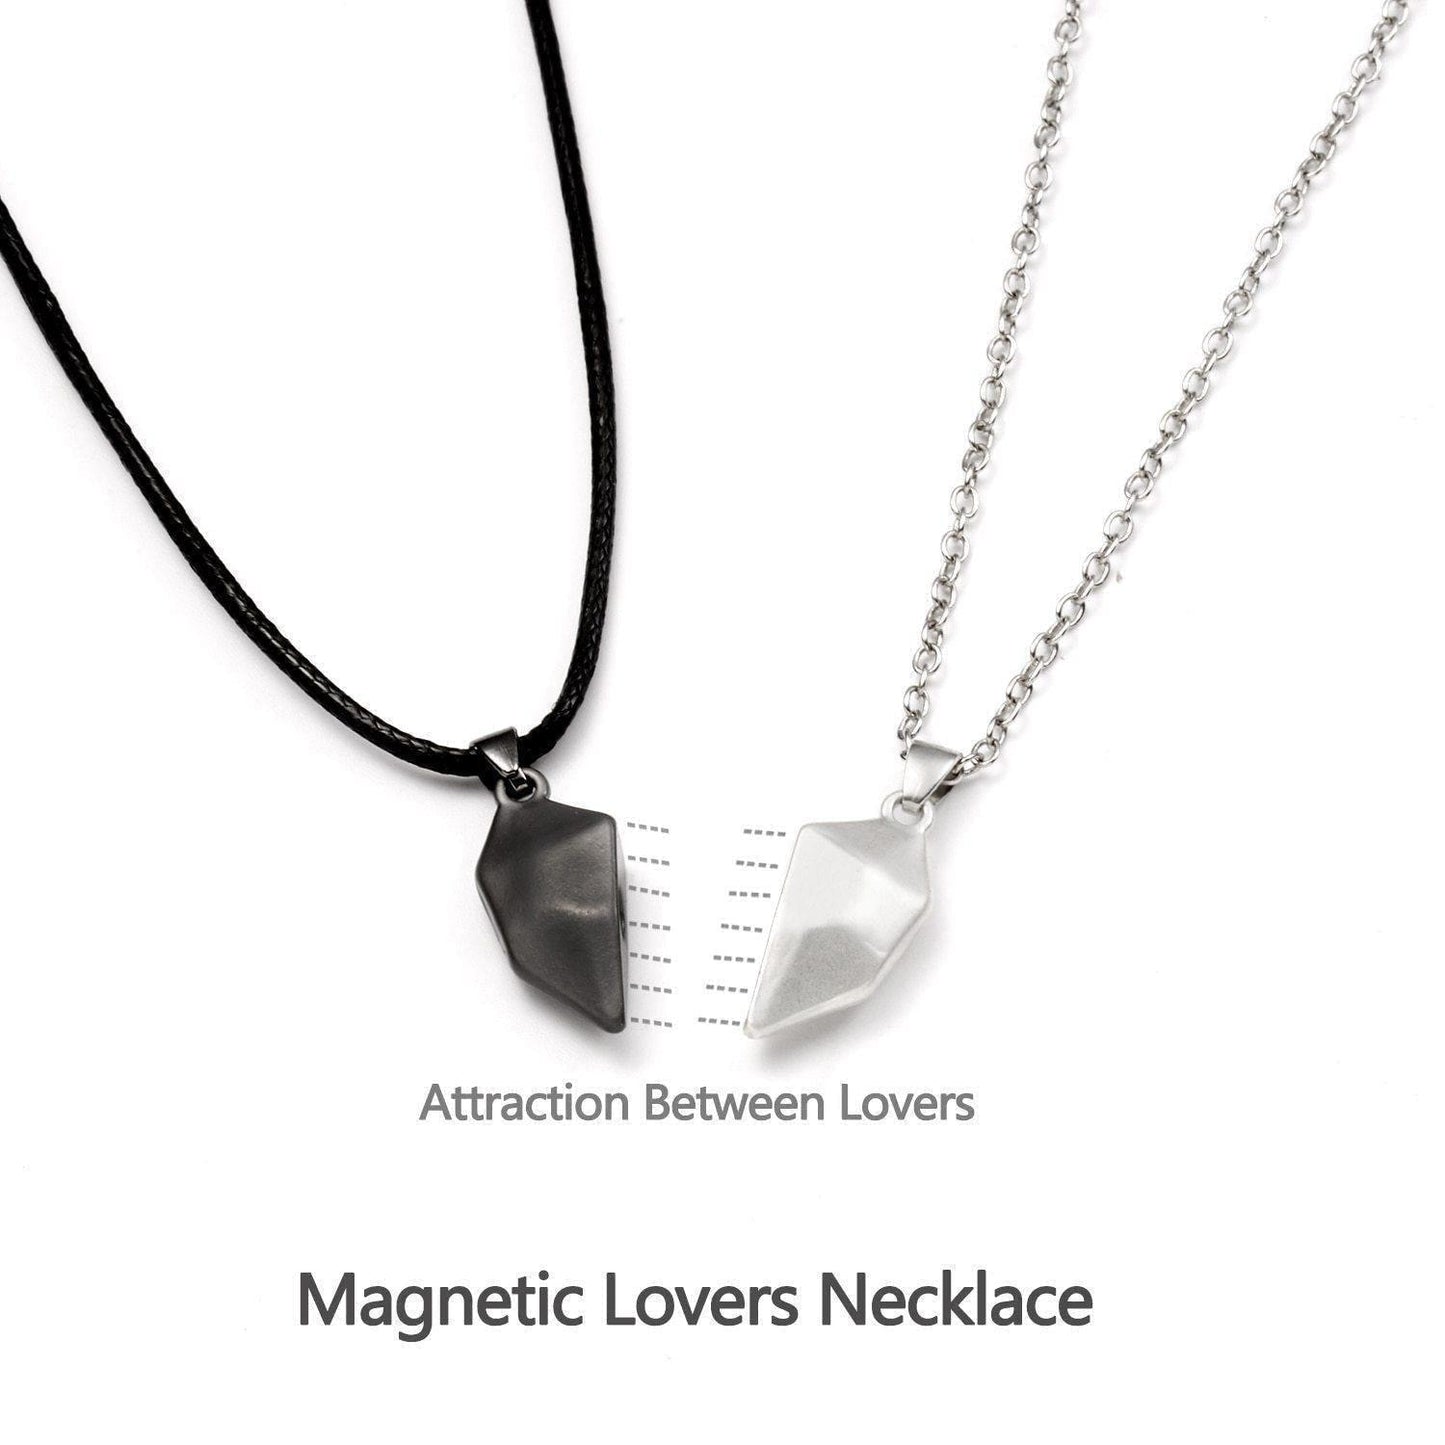 Matching Couple Necklaces For My Hubby in 2023 | Matching Couple Necklaces For My Hubby - undefined | birthday gift for hubby, birthday ideas for husband, husband gift ideas, Matching Relationship Necklaces for Husband, My Husband Necklace | From Hunny Life | hunnylife.com